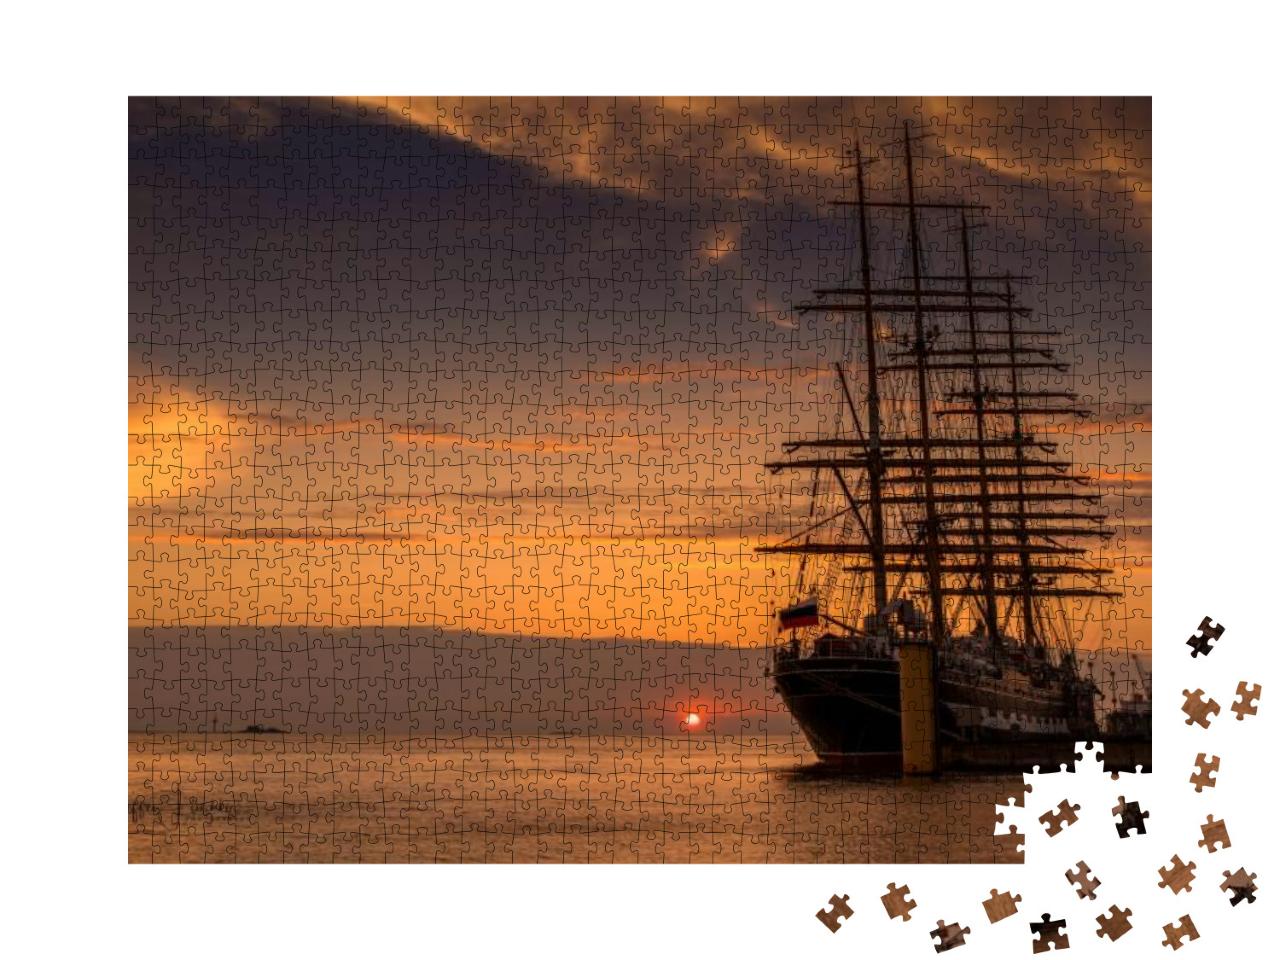 Sunset At the North Sea with a Ship in the Foreground... Jigsaw Puzzle with 1000 pieces